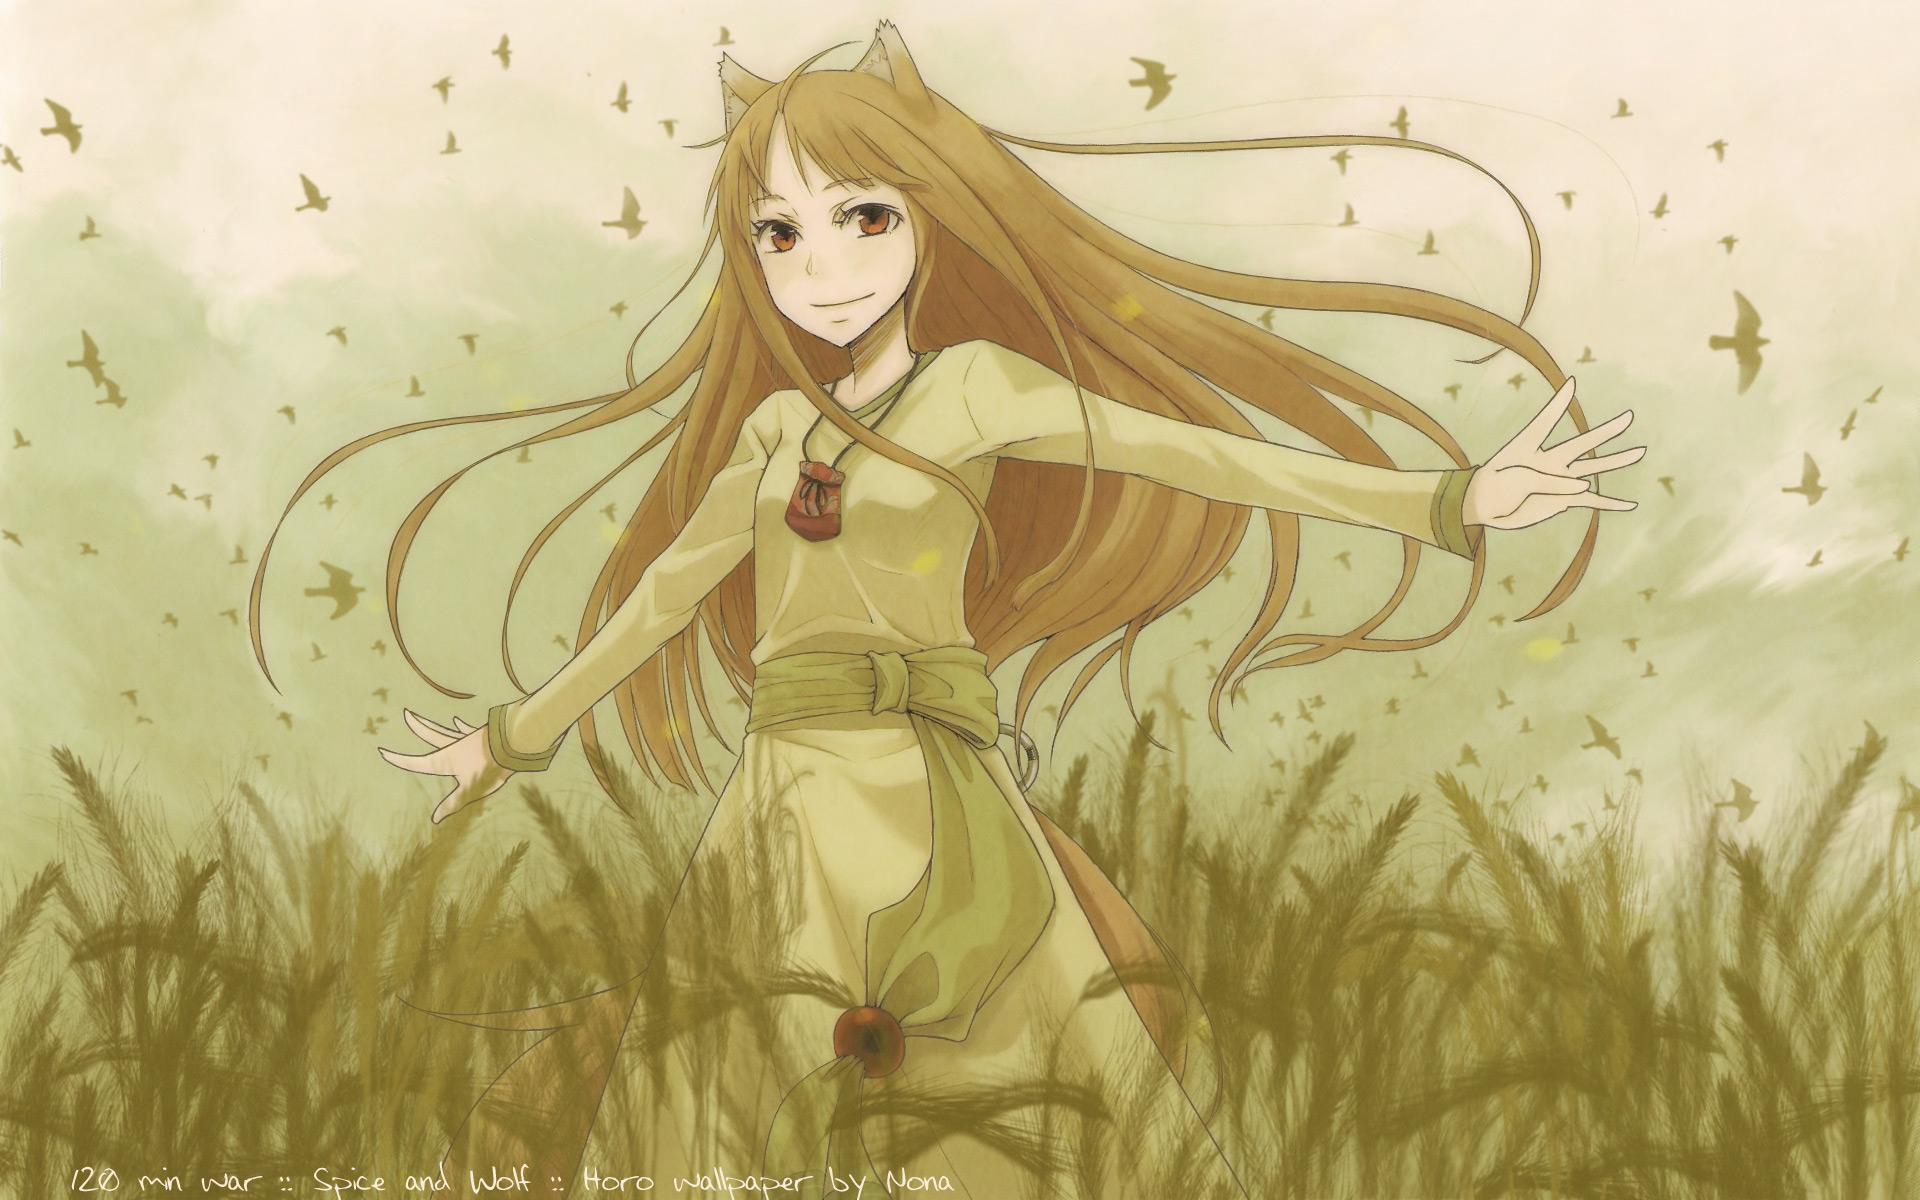 Spice and Wolf, Holo The Wise Wolf, anime girls - desktop wallpaper